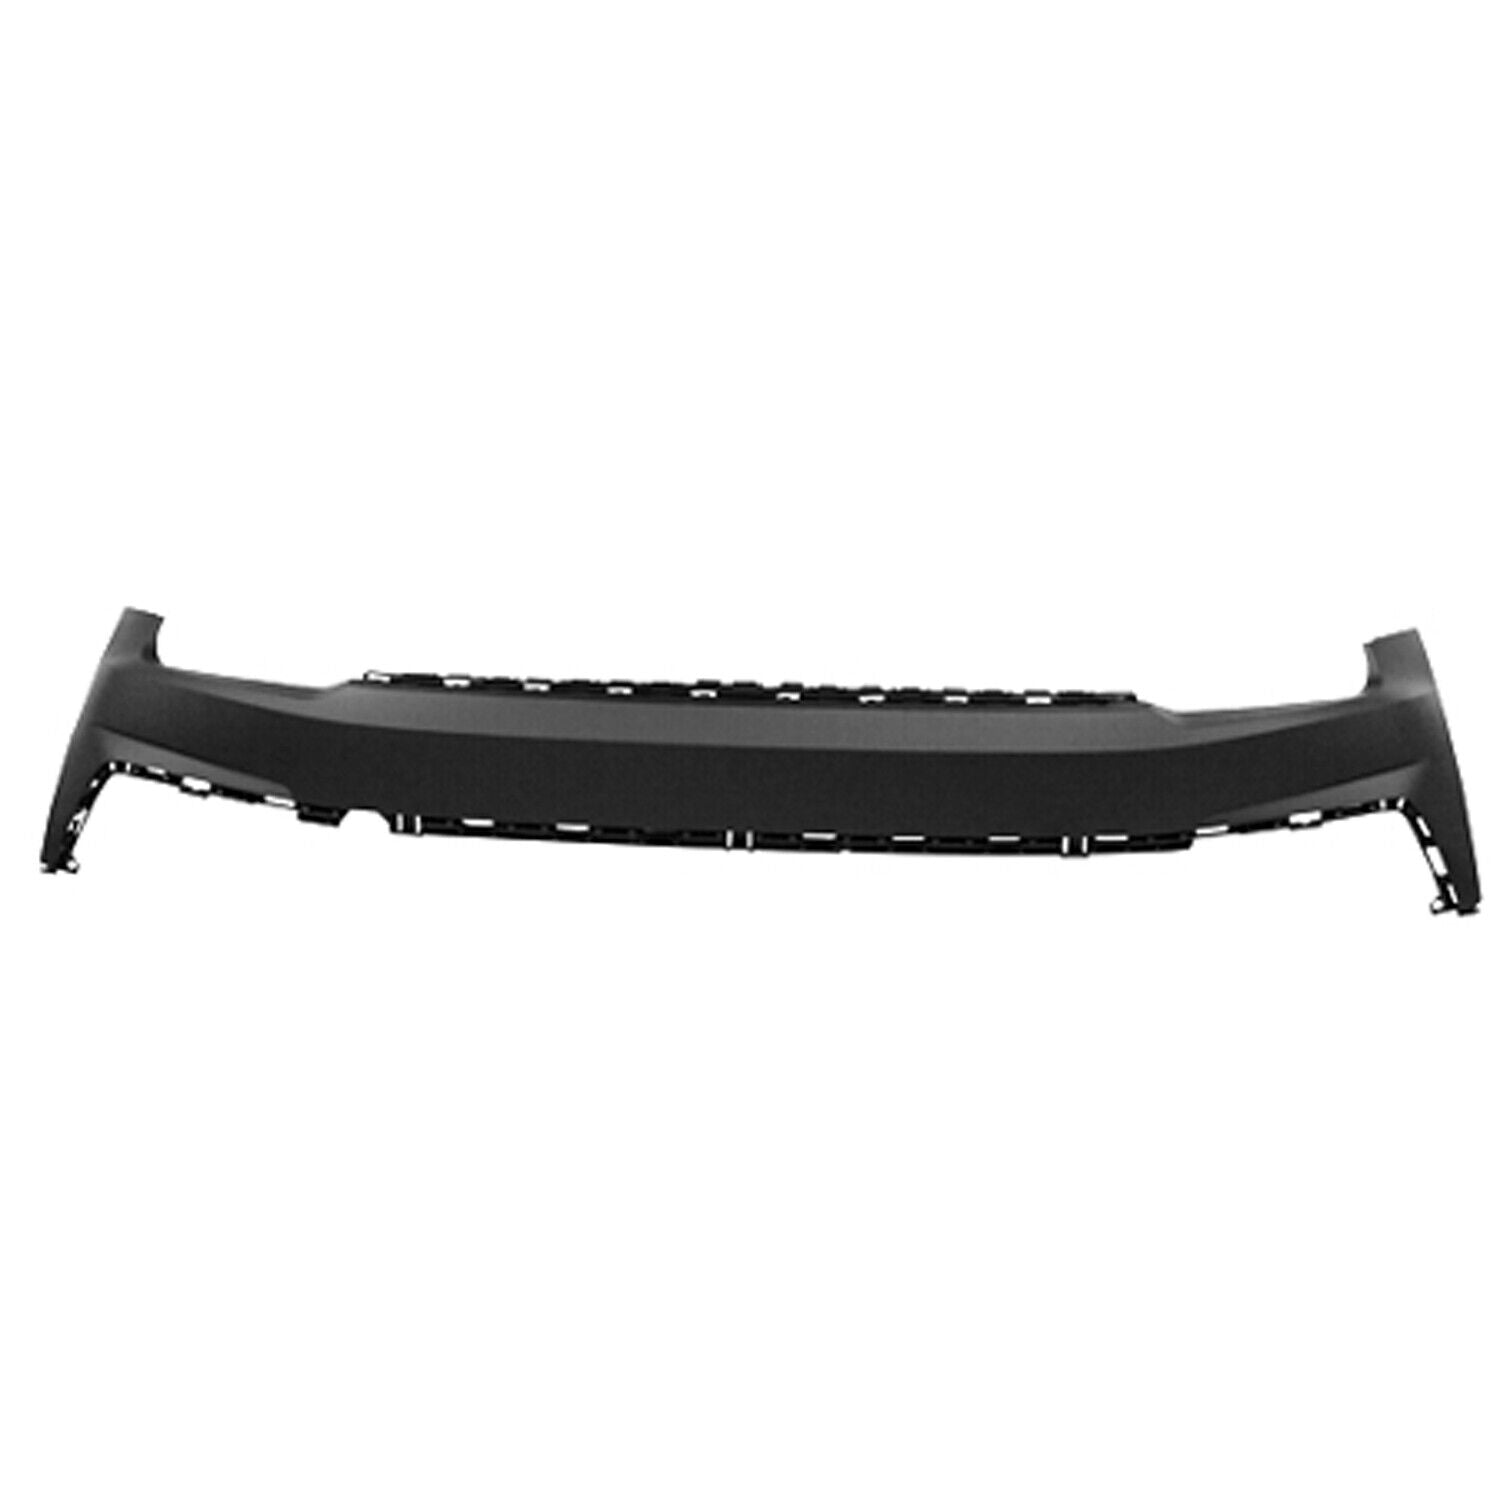 2018-2020 Volkswagen ATLAS; Front Bumper Cover upper; Painted to Match